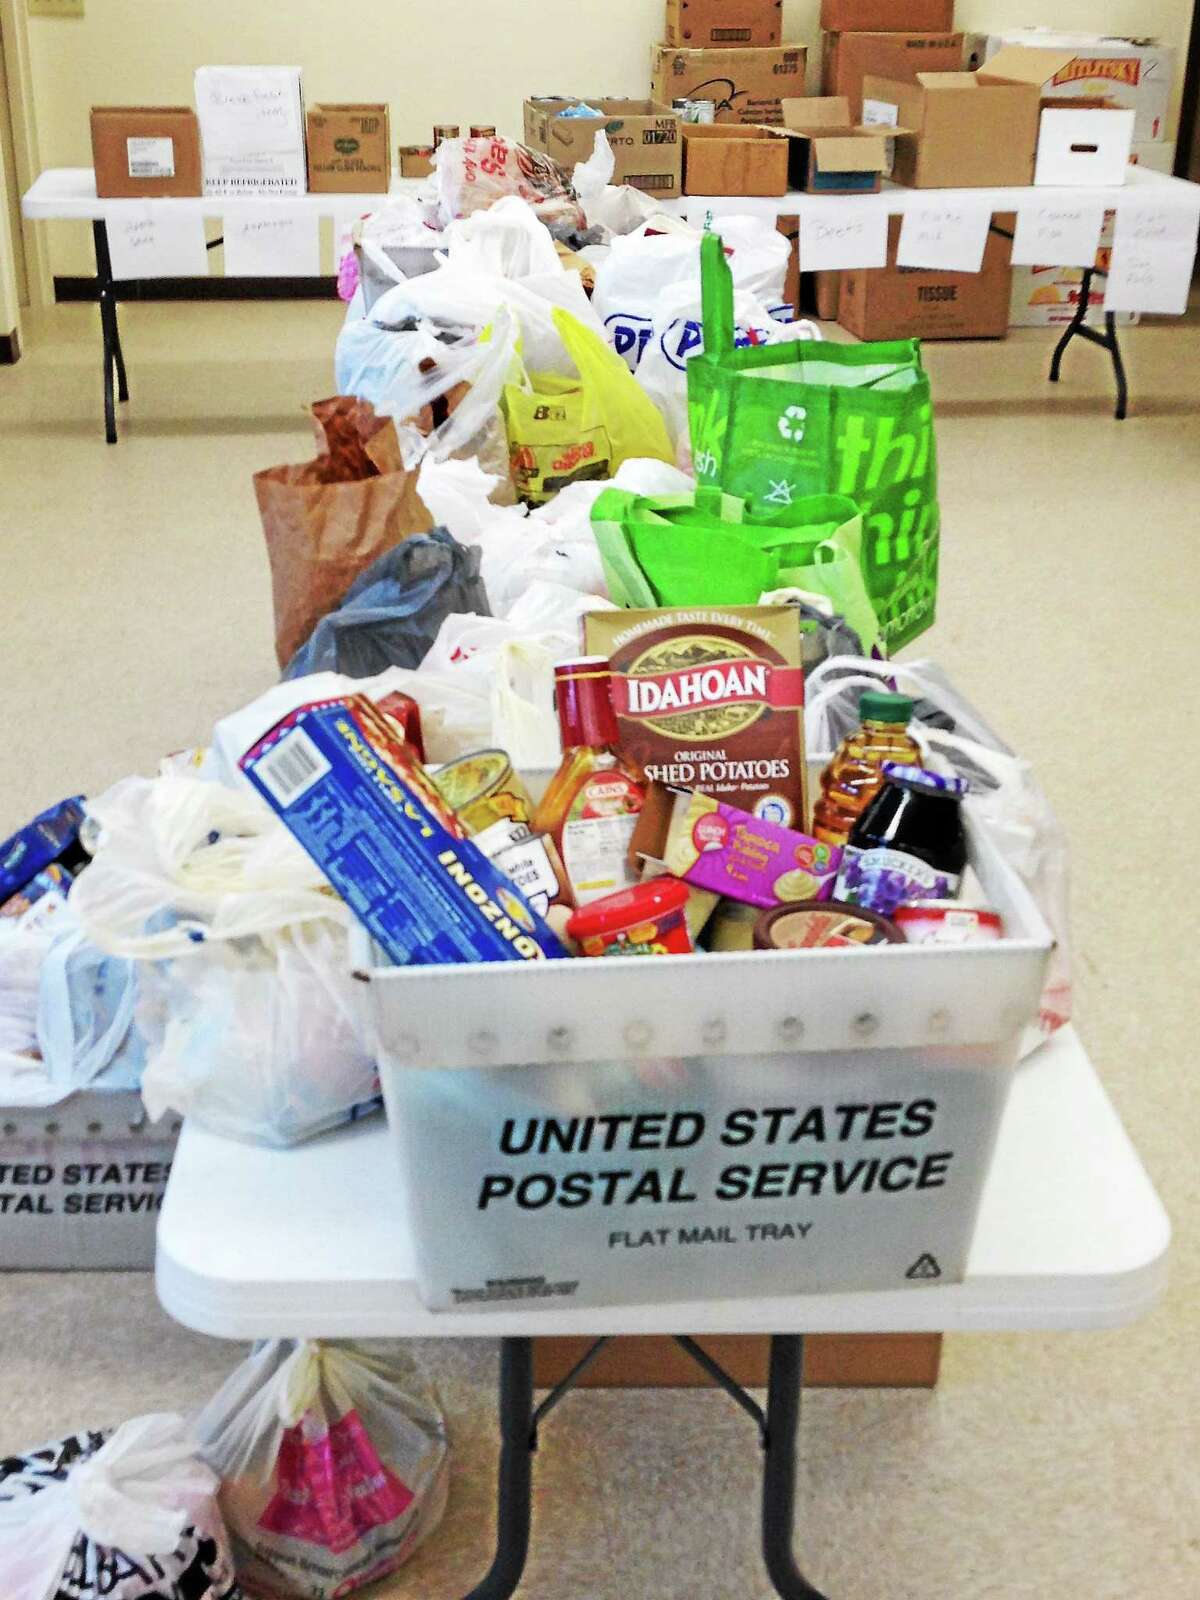 COMMUNITY A7 ¬ National Association of Letter Carriers Food Drive.